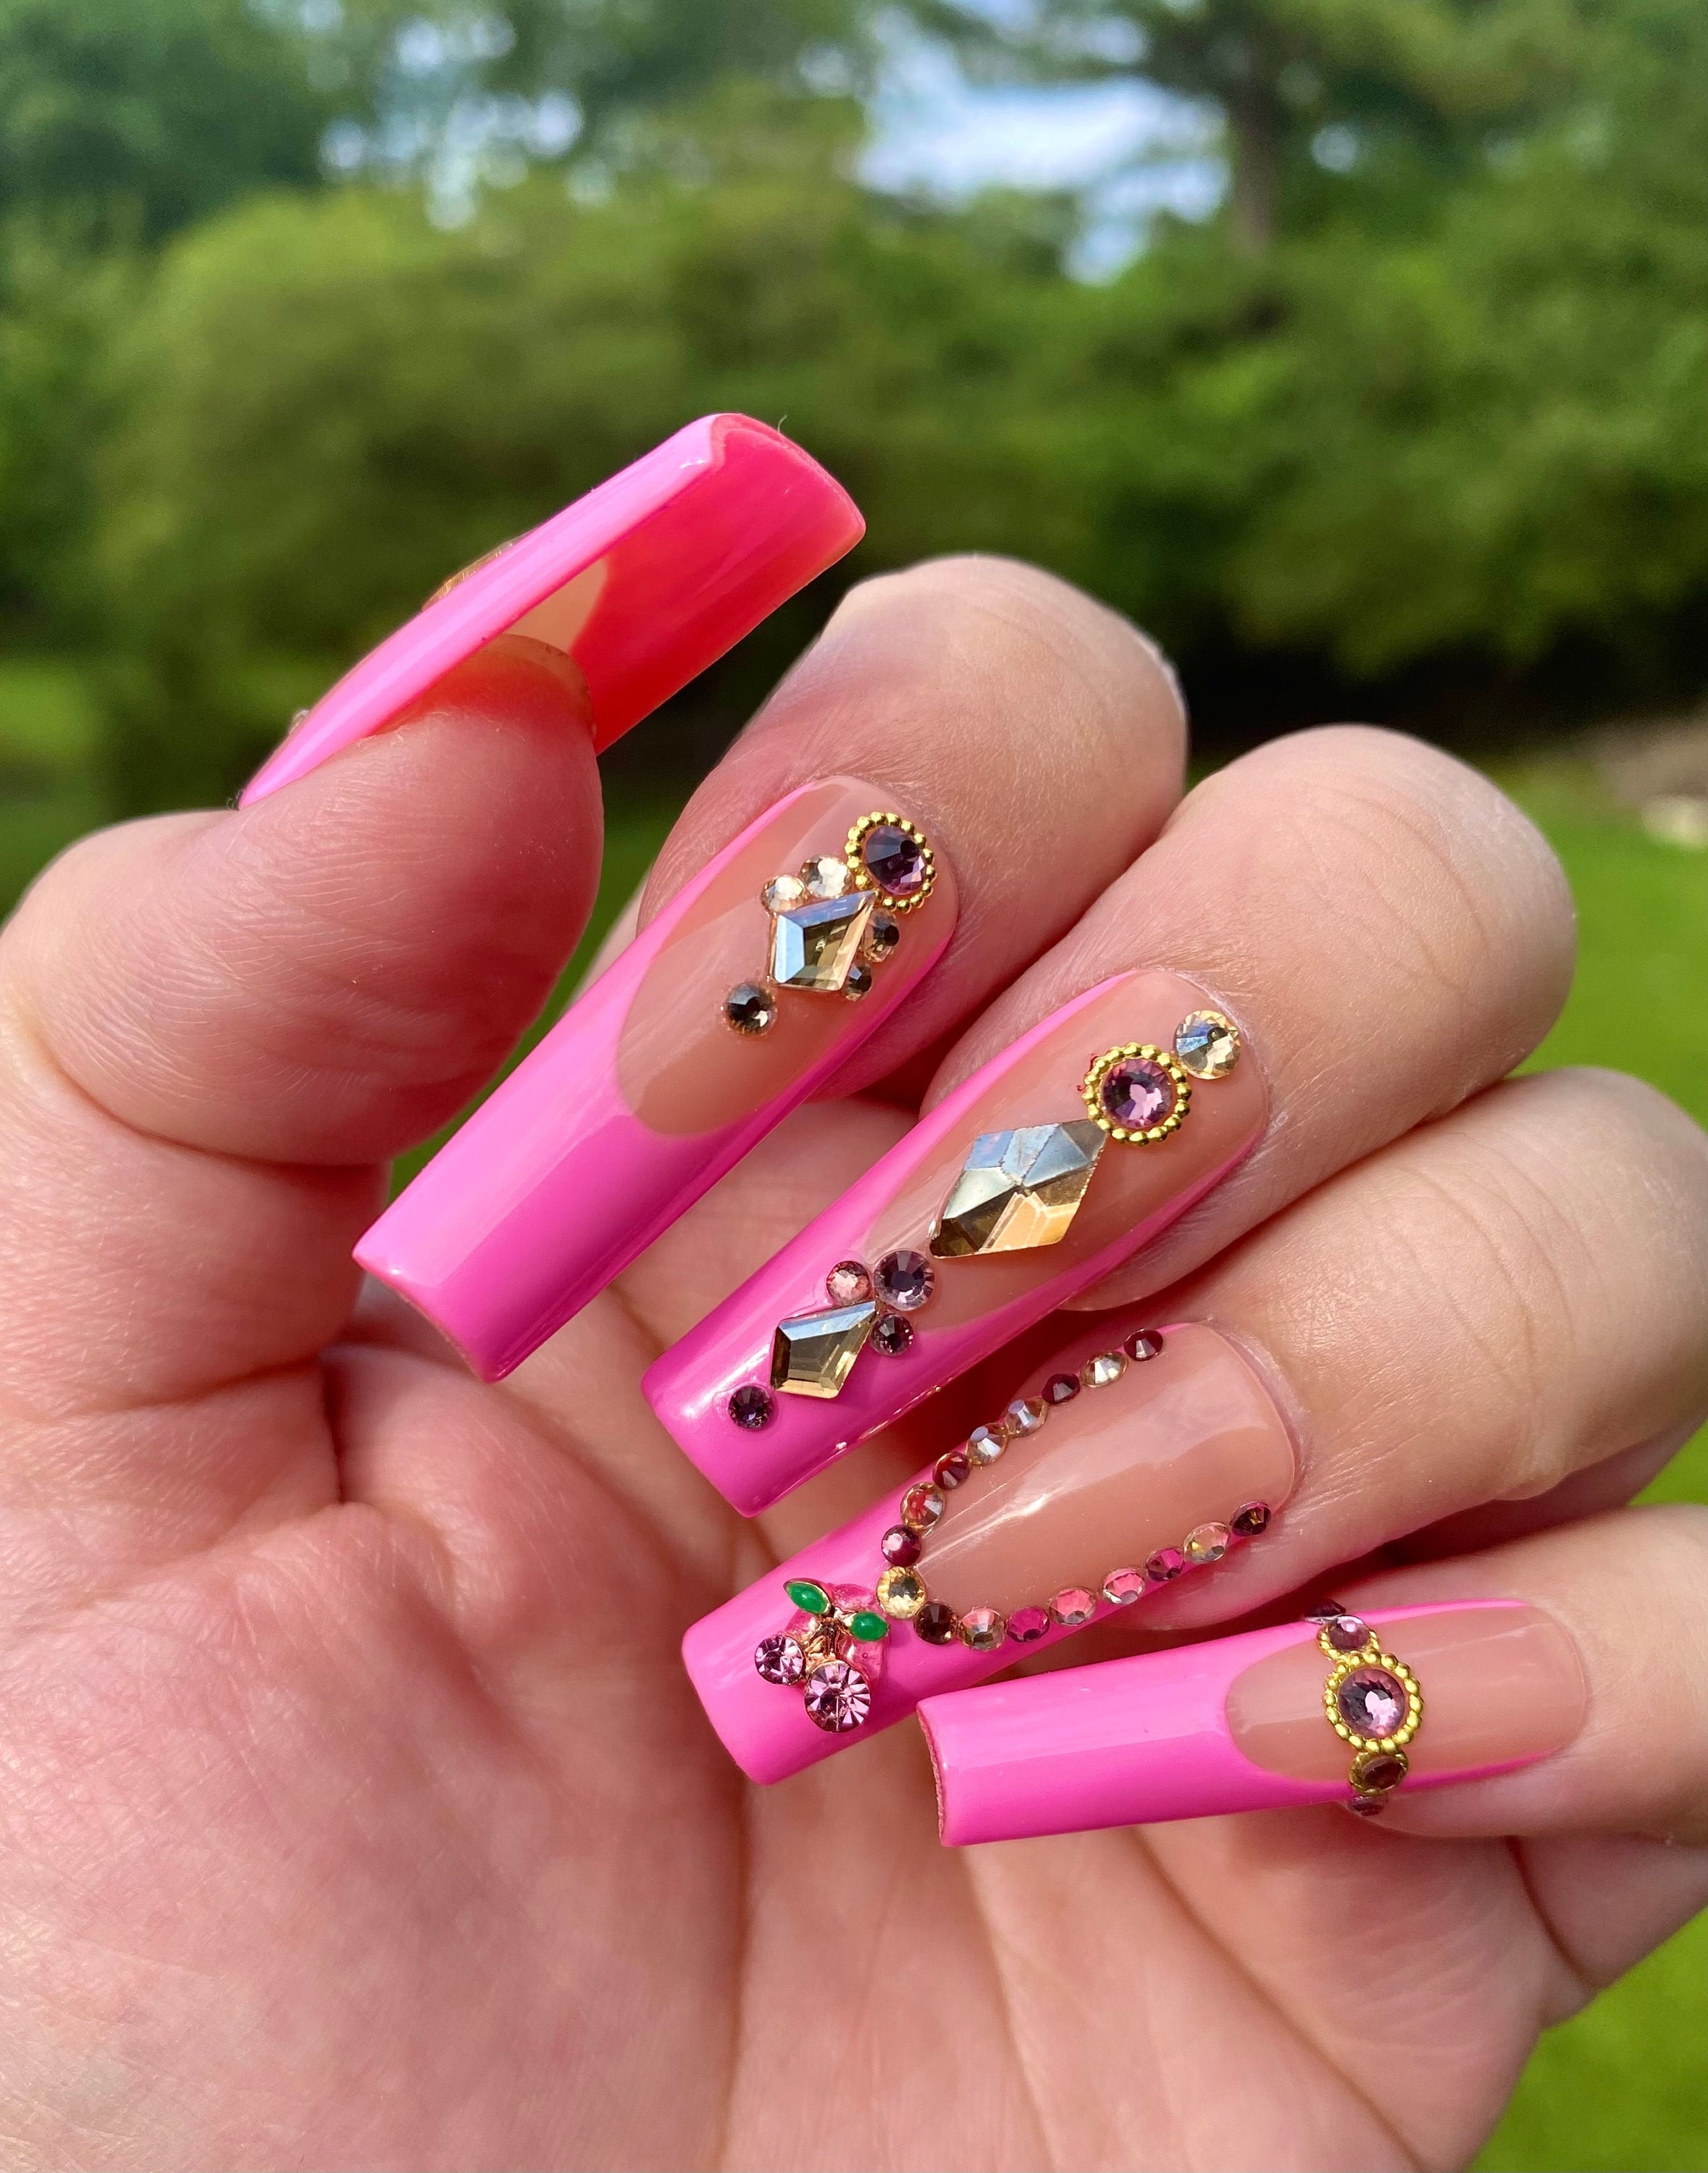 Acrylic nails décorate with rhinestones & pink orchid